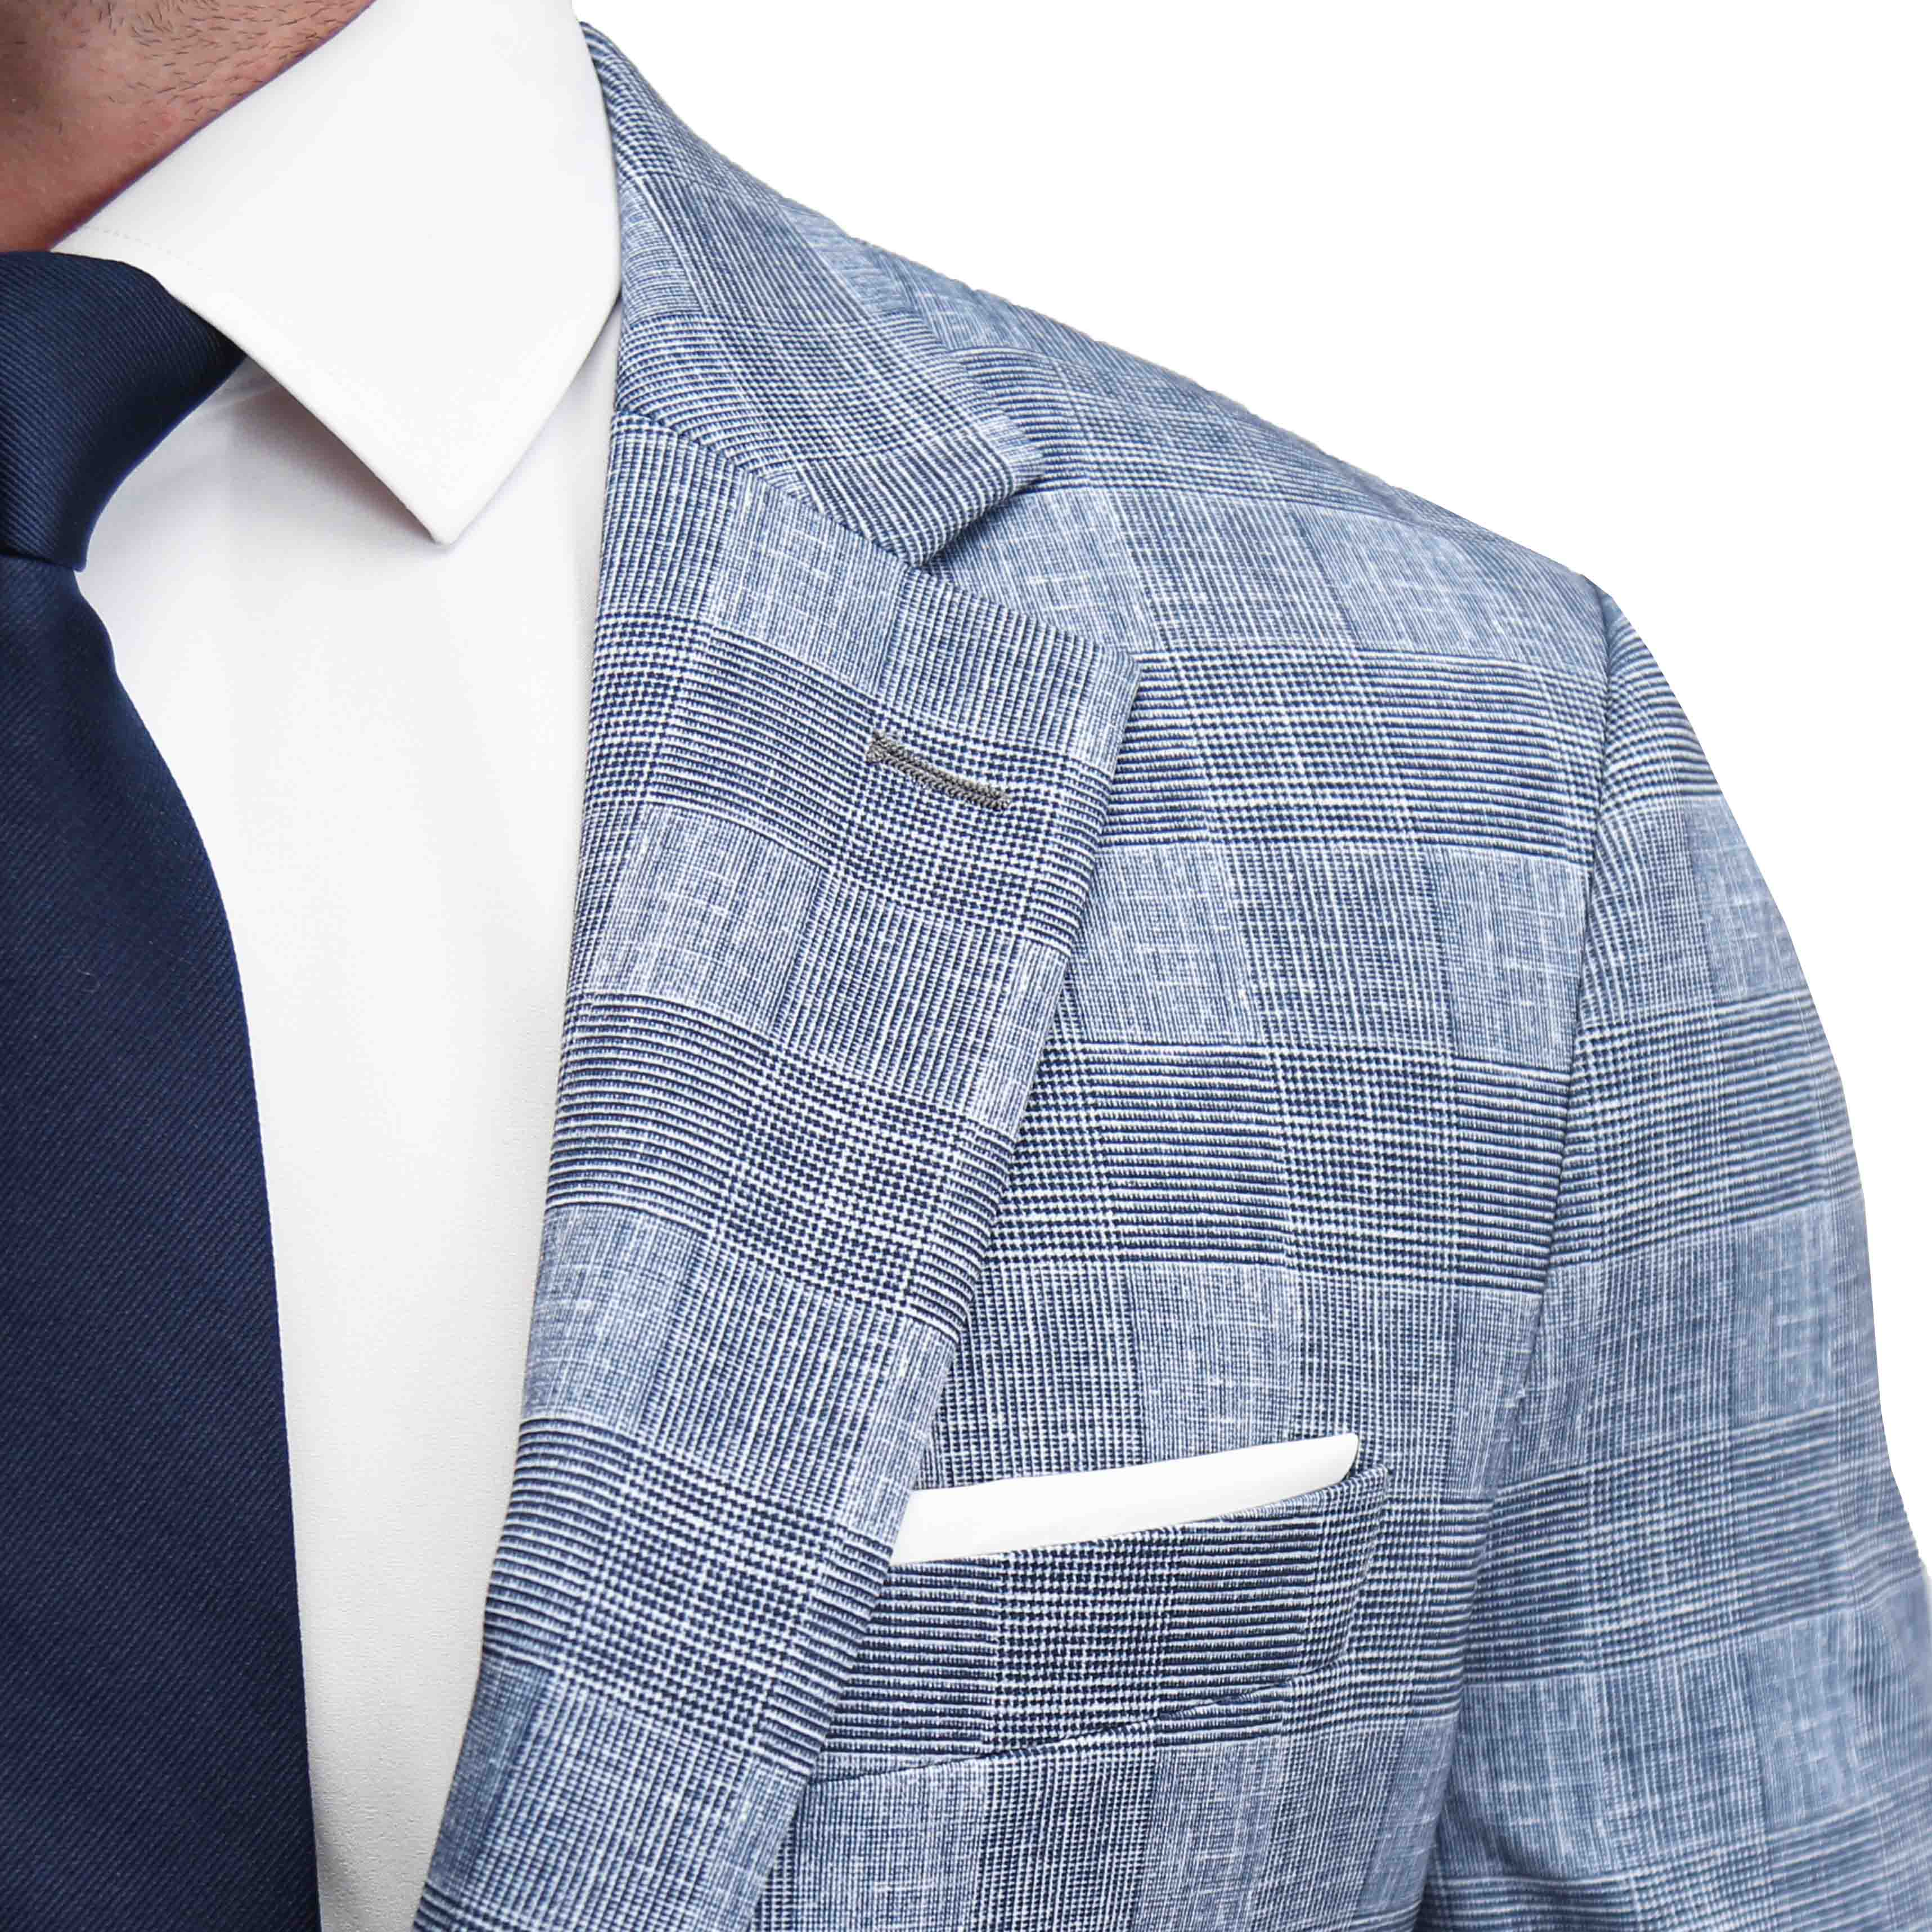 Athletic Fit Stretch Blazer - Knit Light Blue, Navy and White Plaid